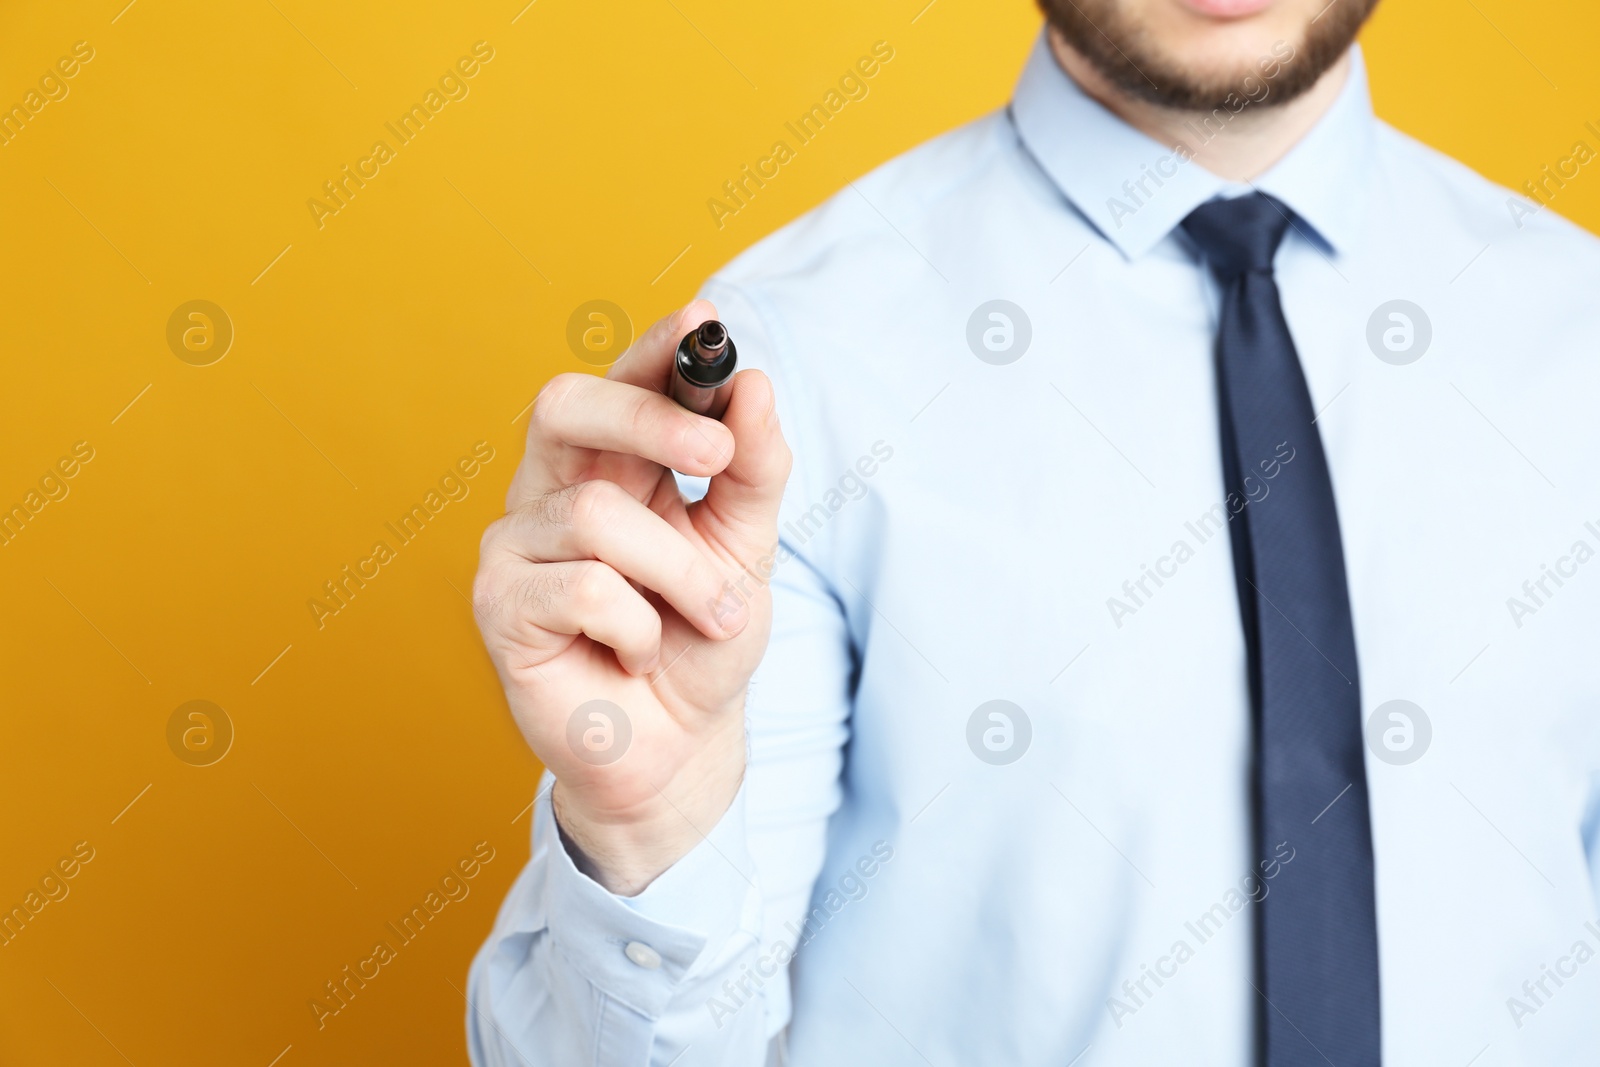 Photo of Businessman with marker against orange background, focus on hand